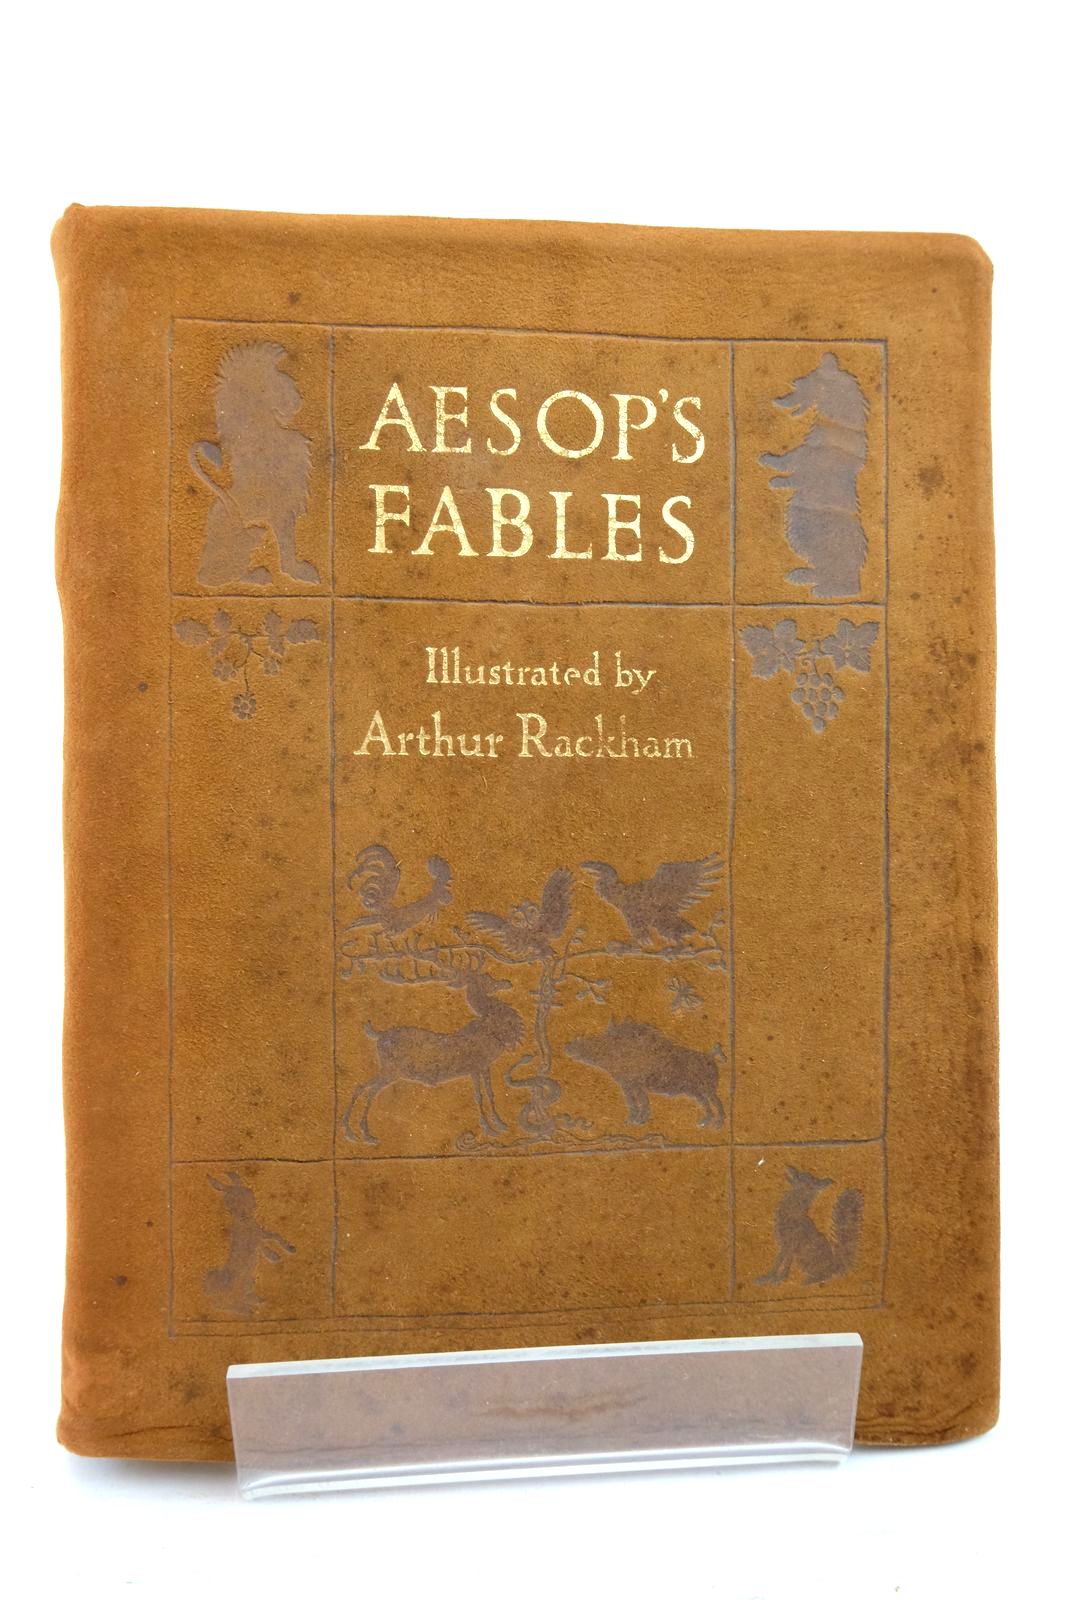 Photo of AESOP'S FABLES- Stock Number: 2137922